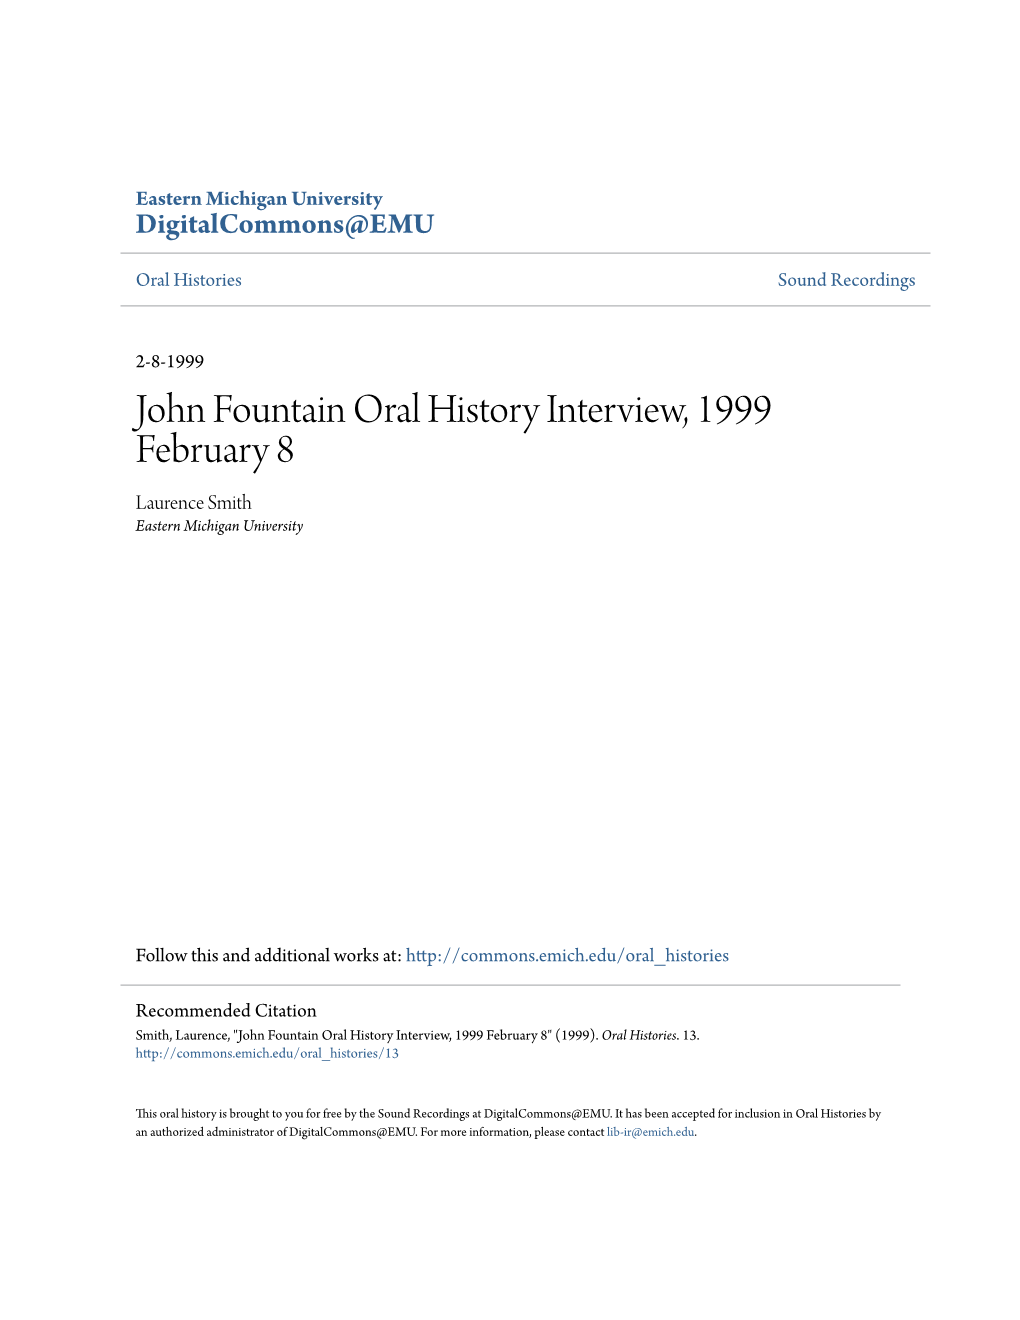 John Fountain Oral History Interview, 1999 February 8 Laurence Smith Eastern Michigan University